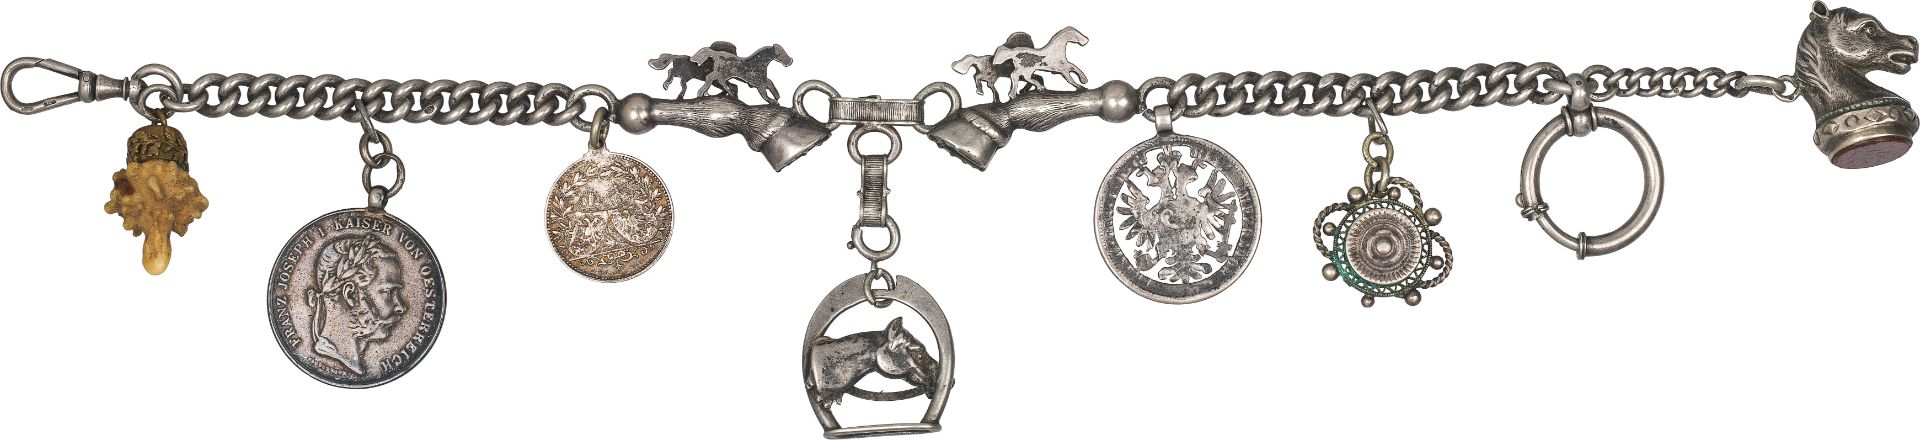 Fob chain "Reiteruhrenkette"silver, horn, coins; 1 fob chain with 7 pendants; partly markedl. 33 cm